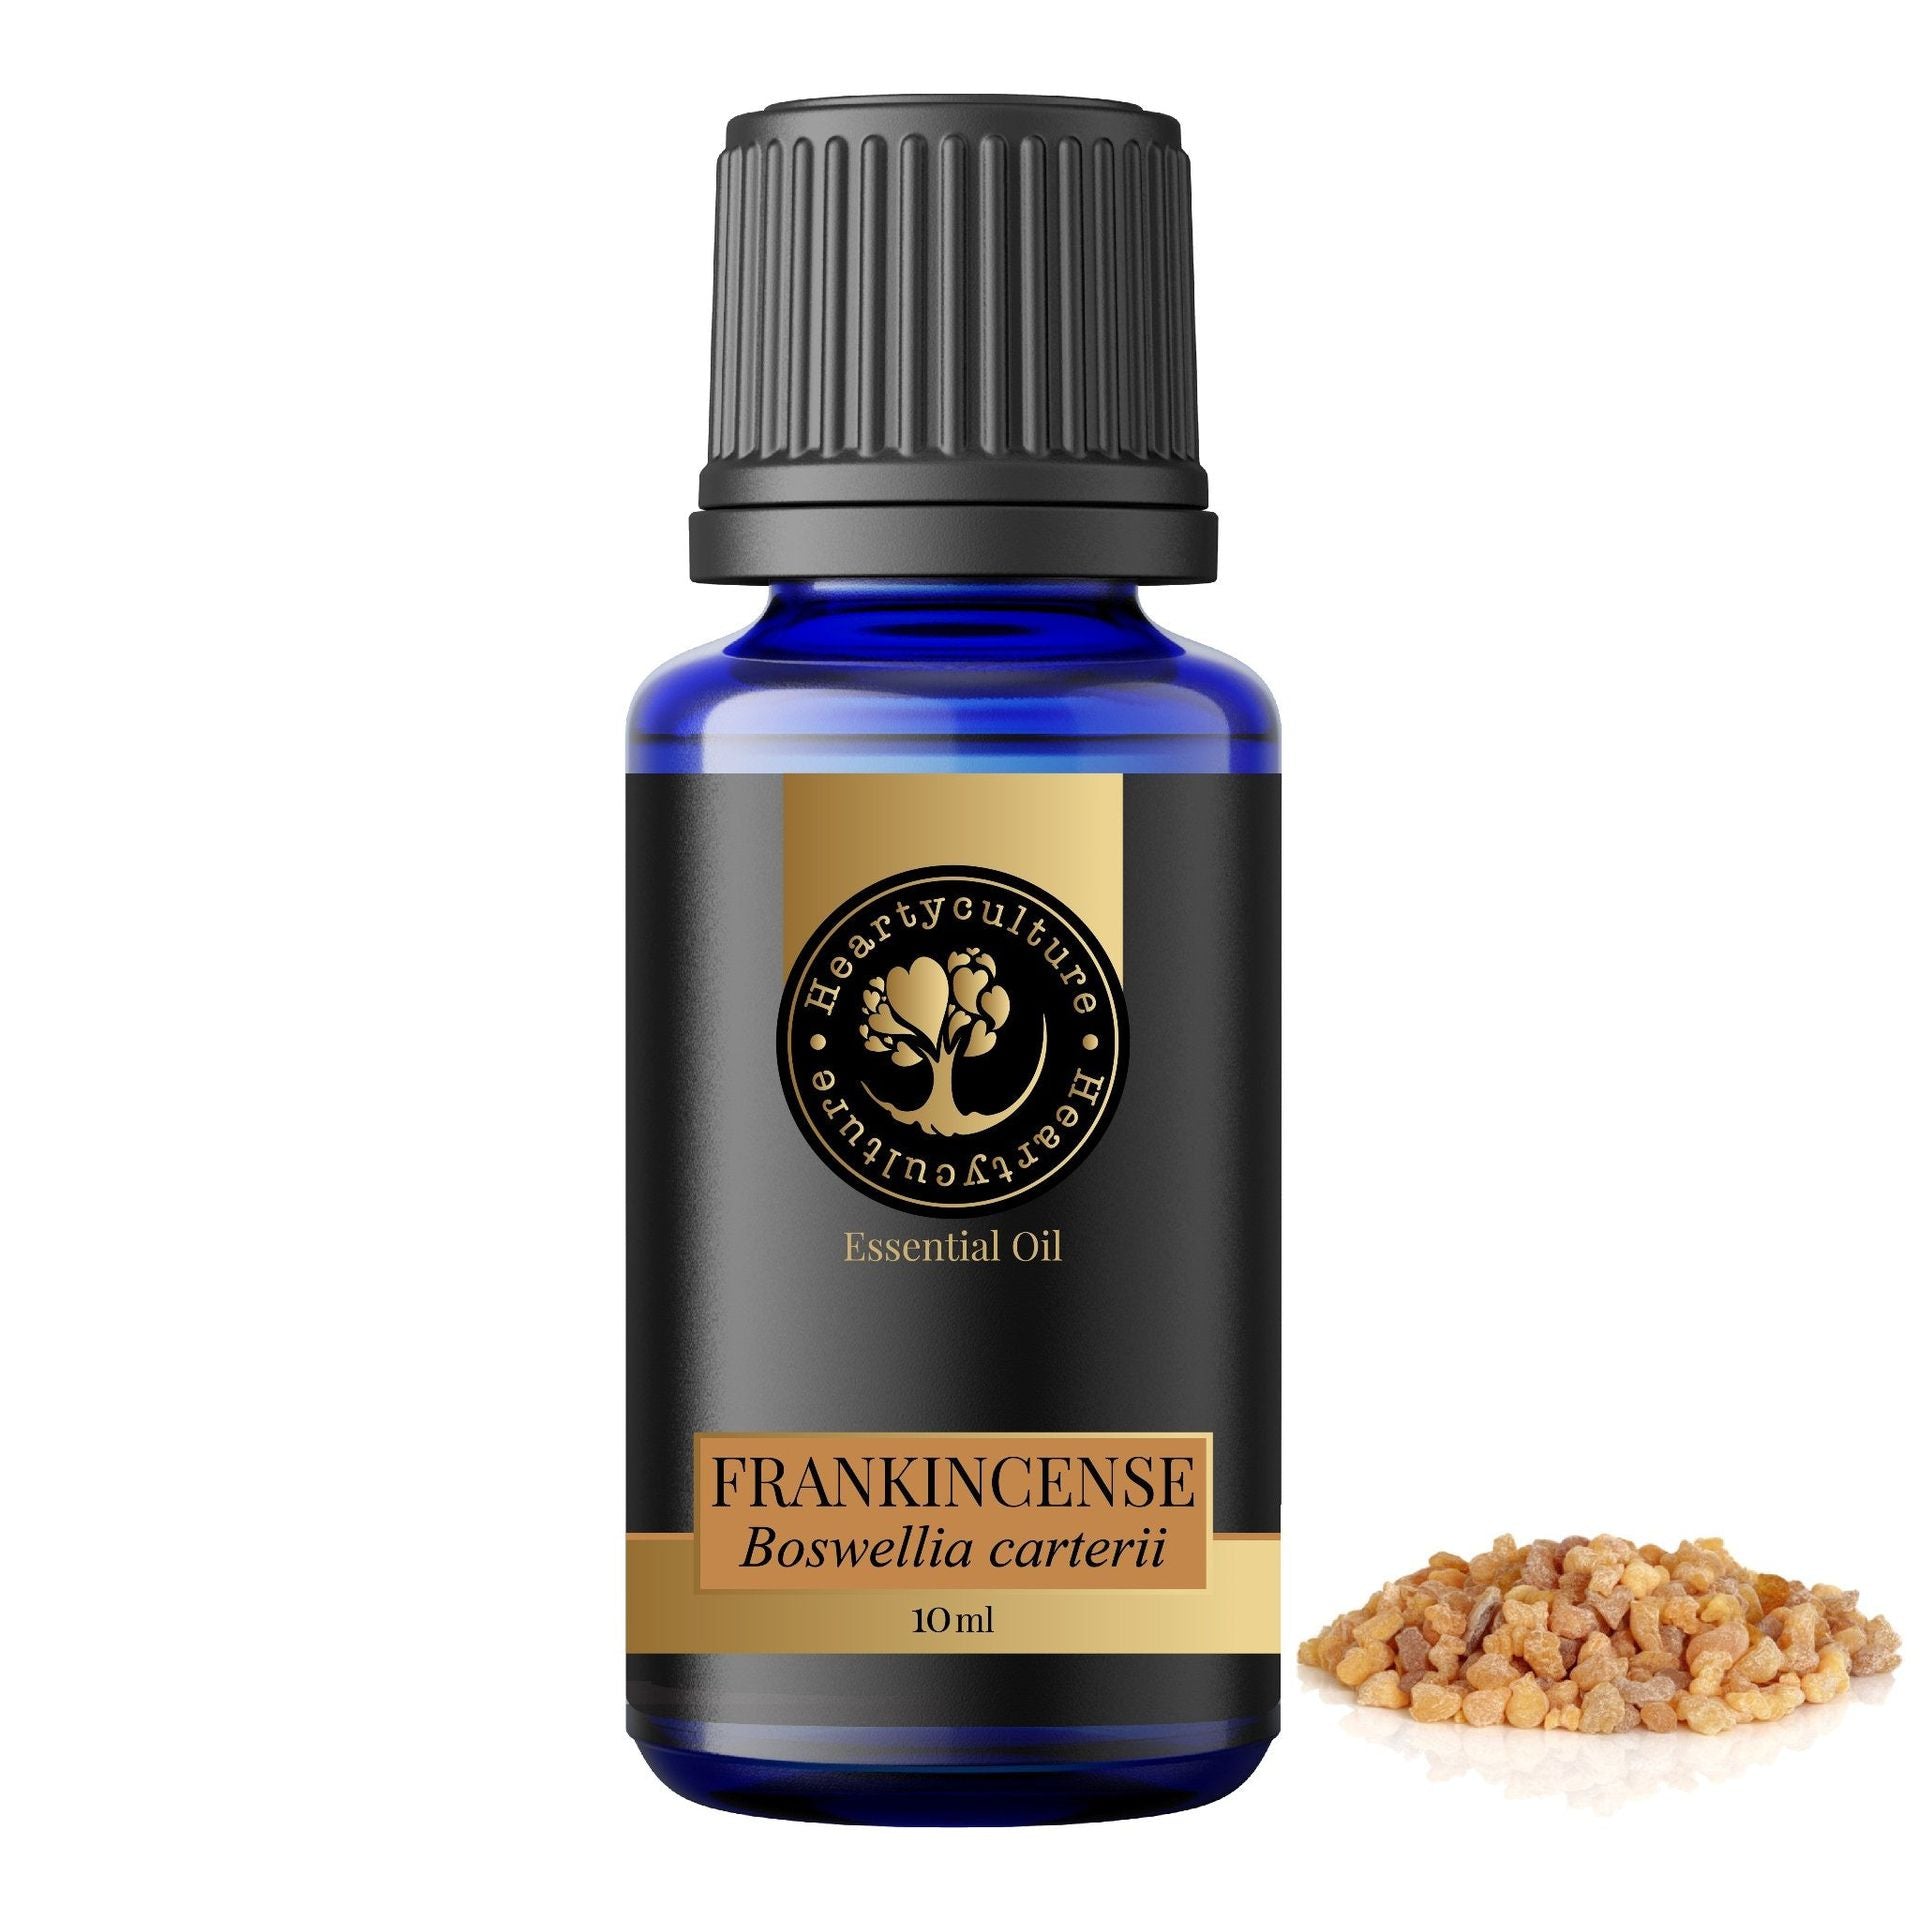 Heartyculture Frankincense Essential Oil - 10 ml - hfnl!fe